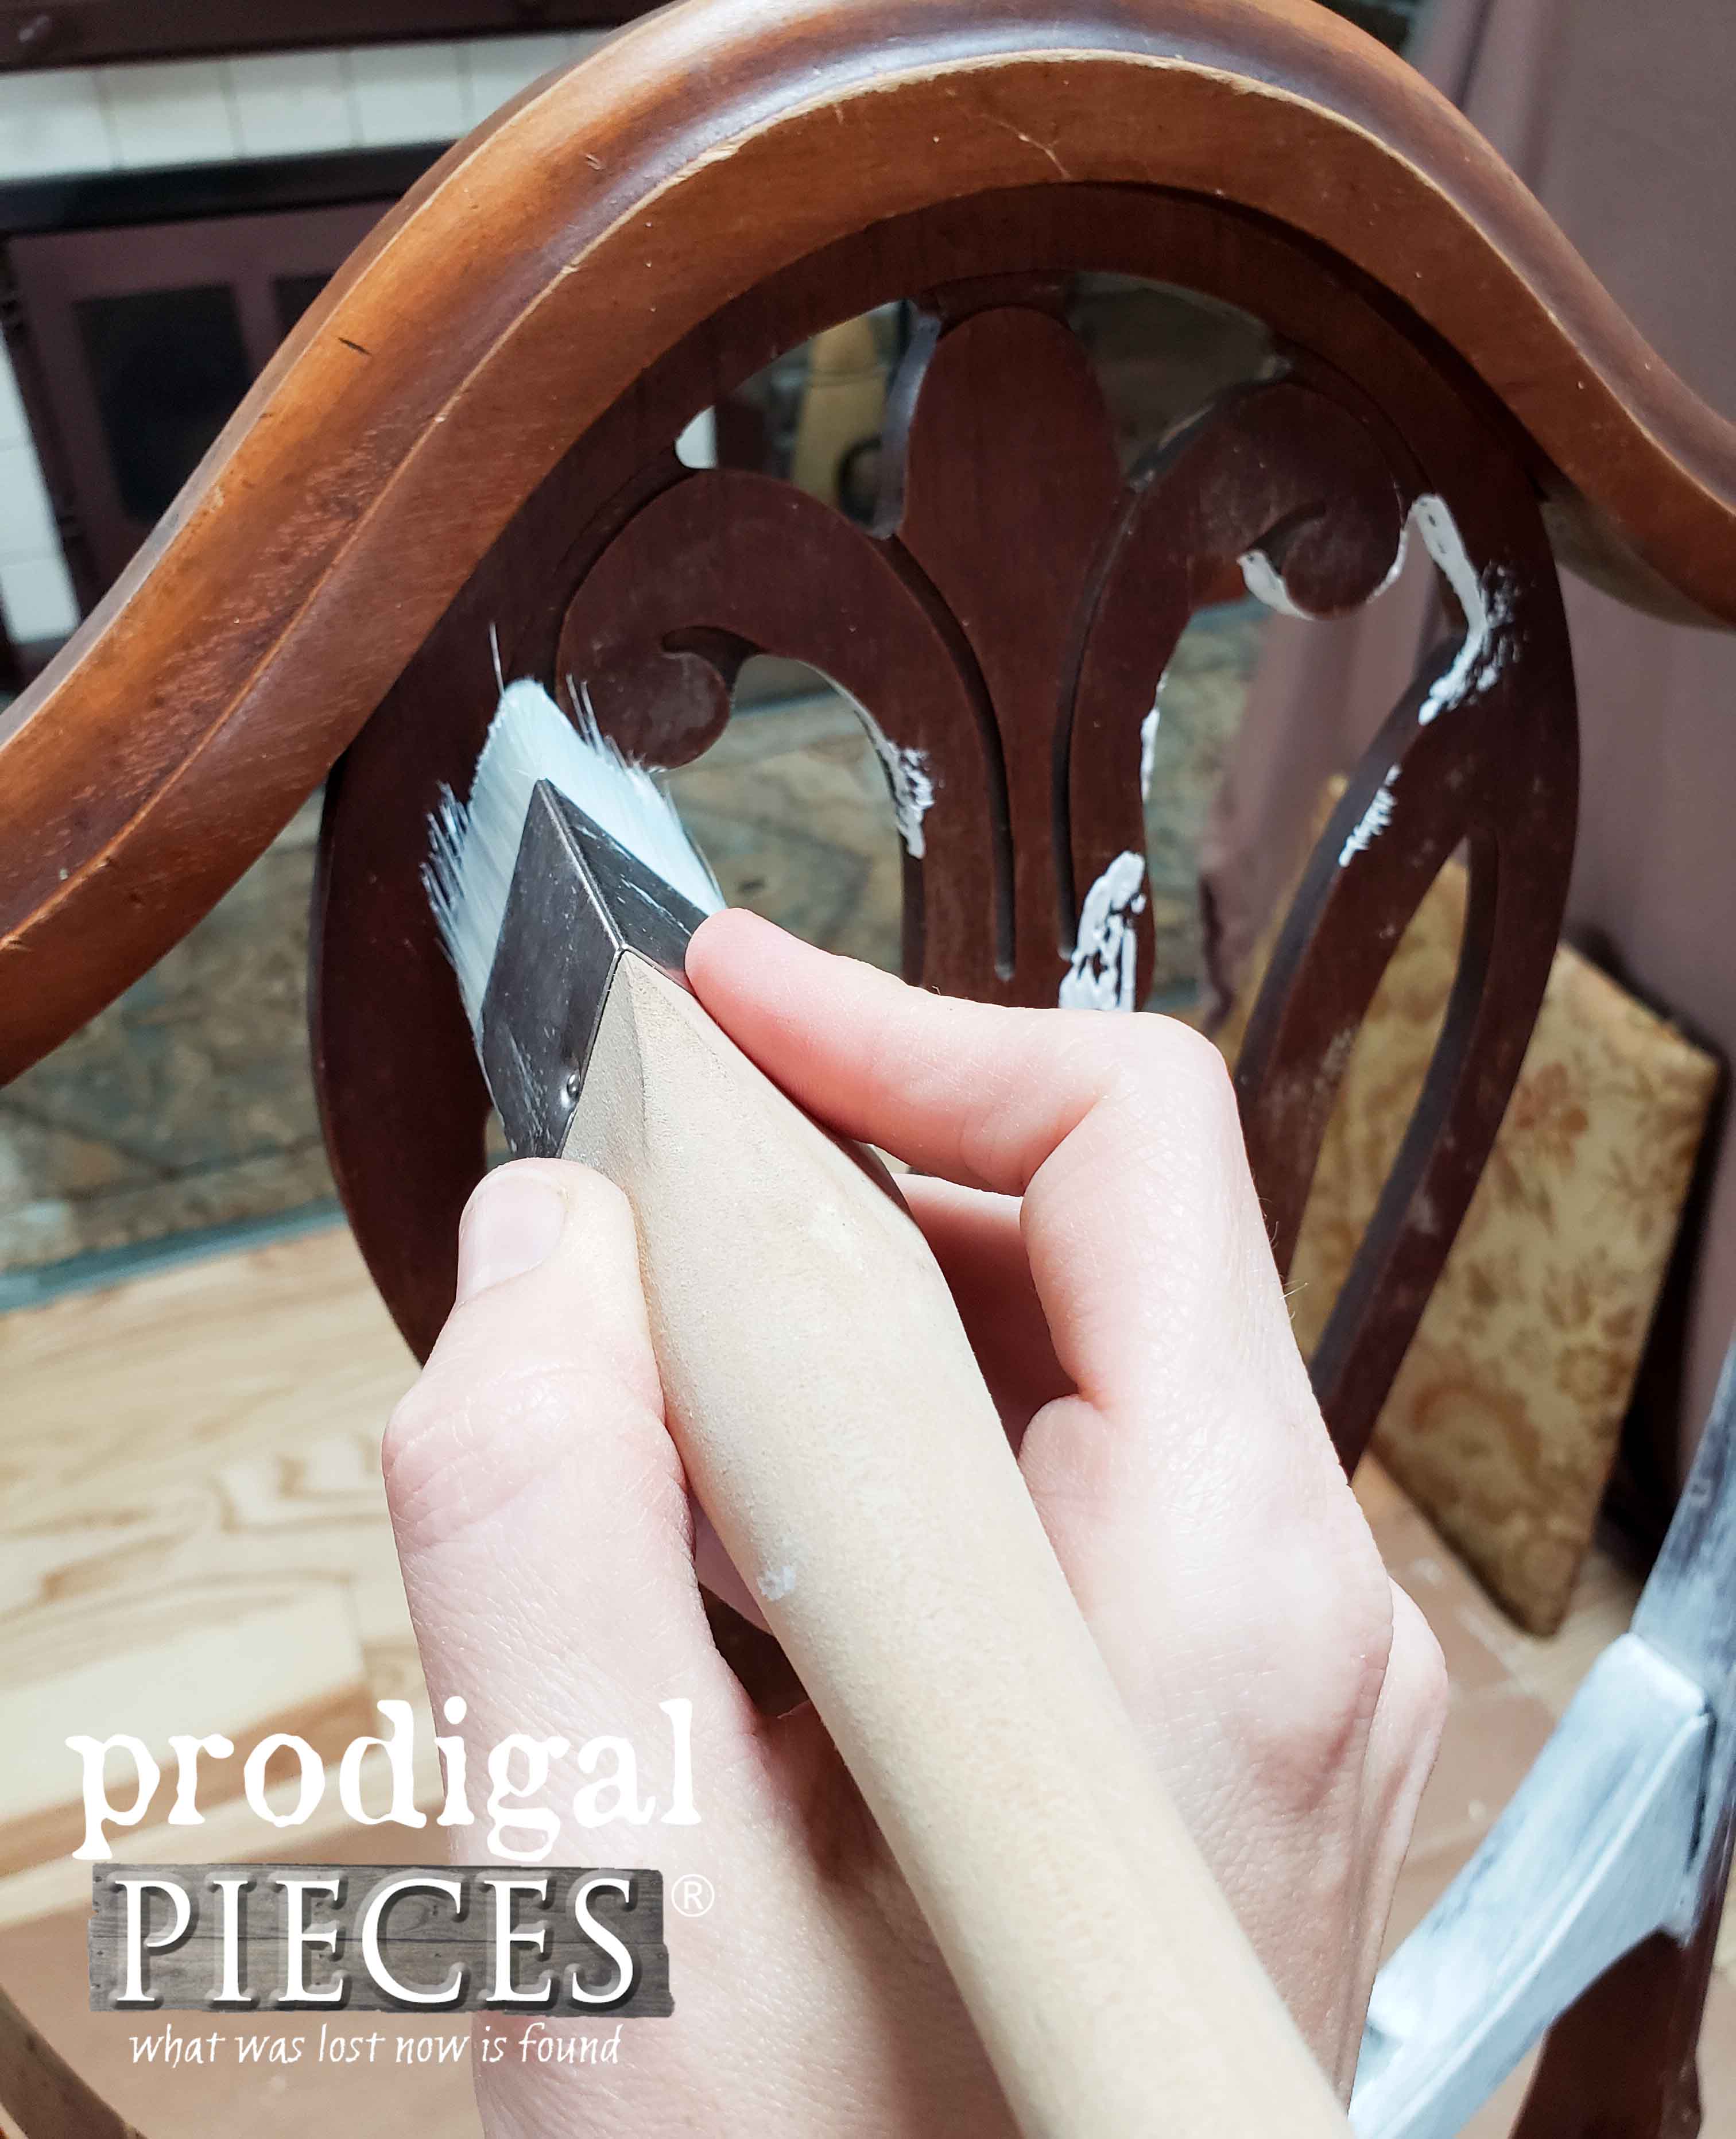 Painting Chair Details by Prodigal Pieces | prodigalpieces.com